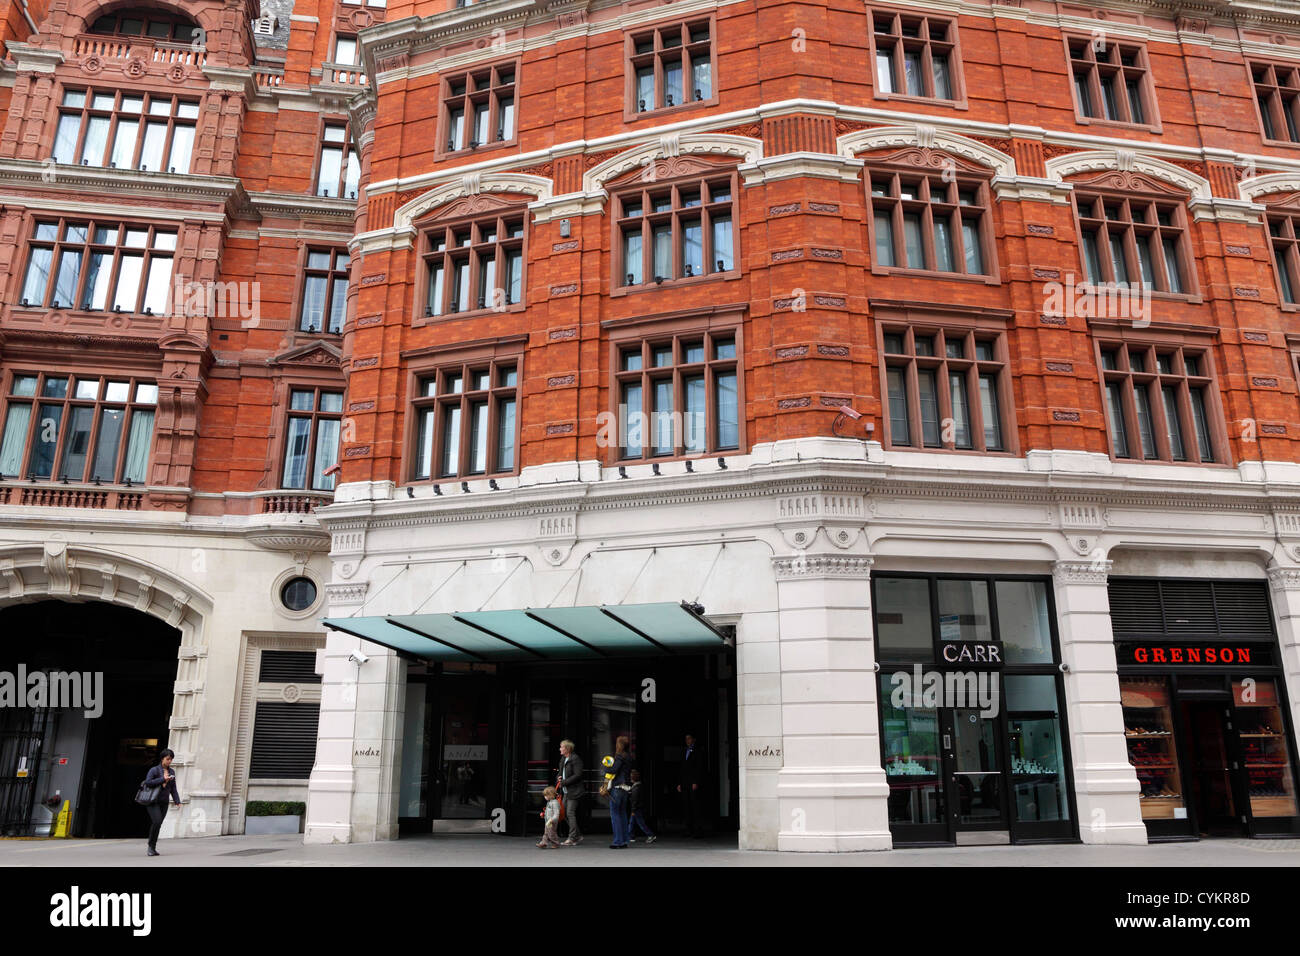 Situated in the City of London is the Andaz Hotel,it`s main entrance is viewed here. Stock Photo